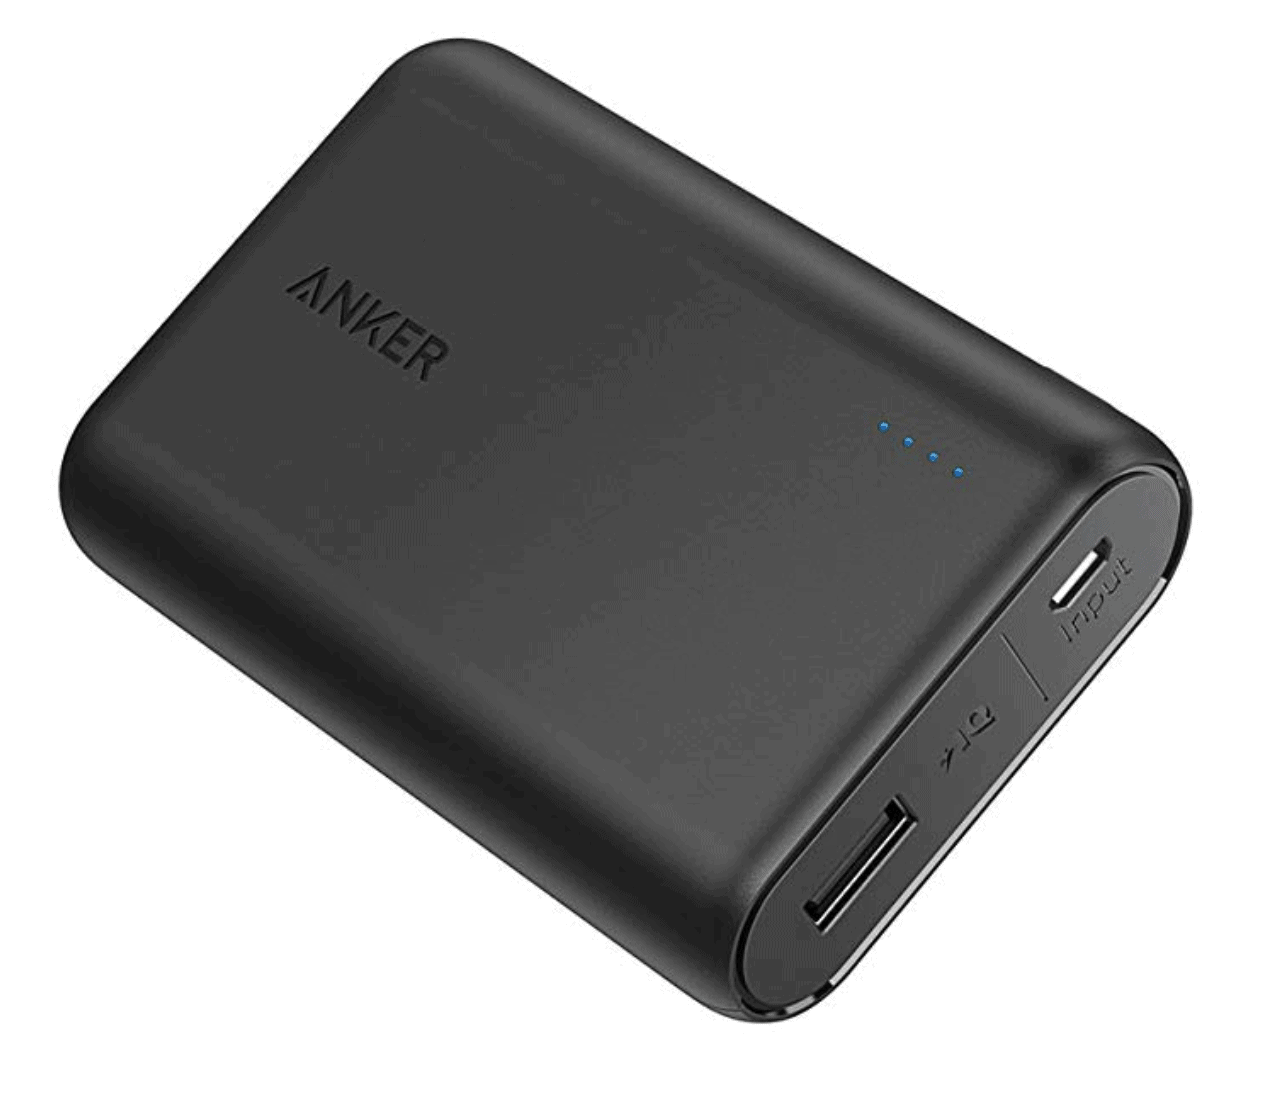 Portable charger - Best travel gift ideas under $50 that are actually useful